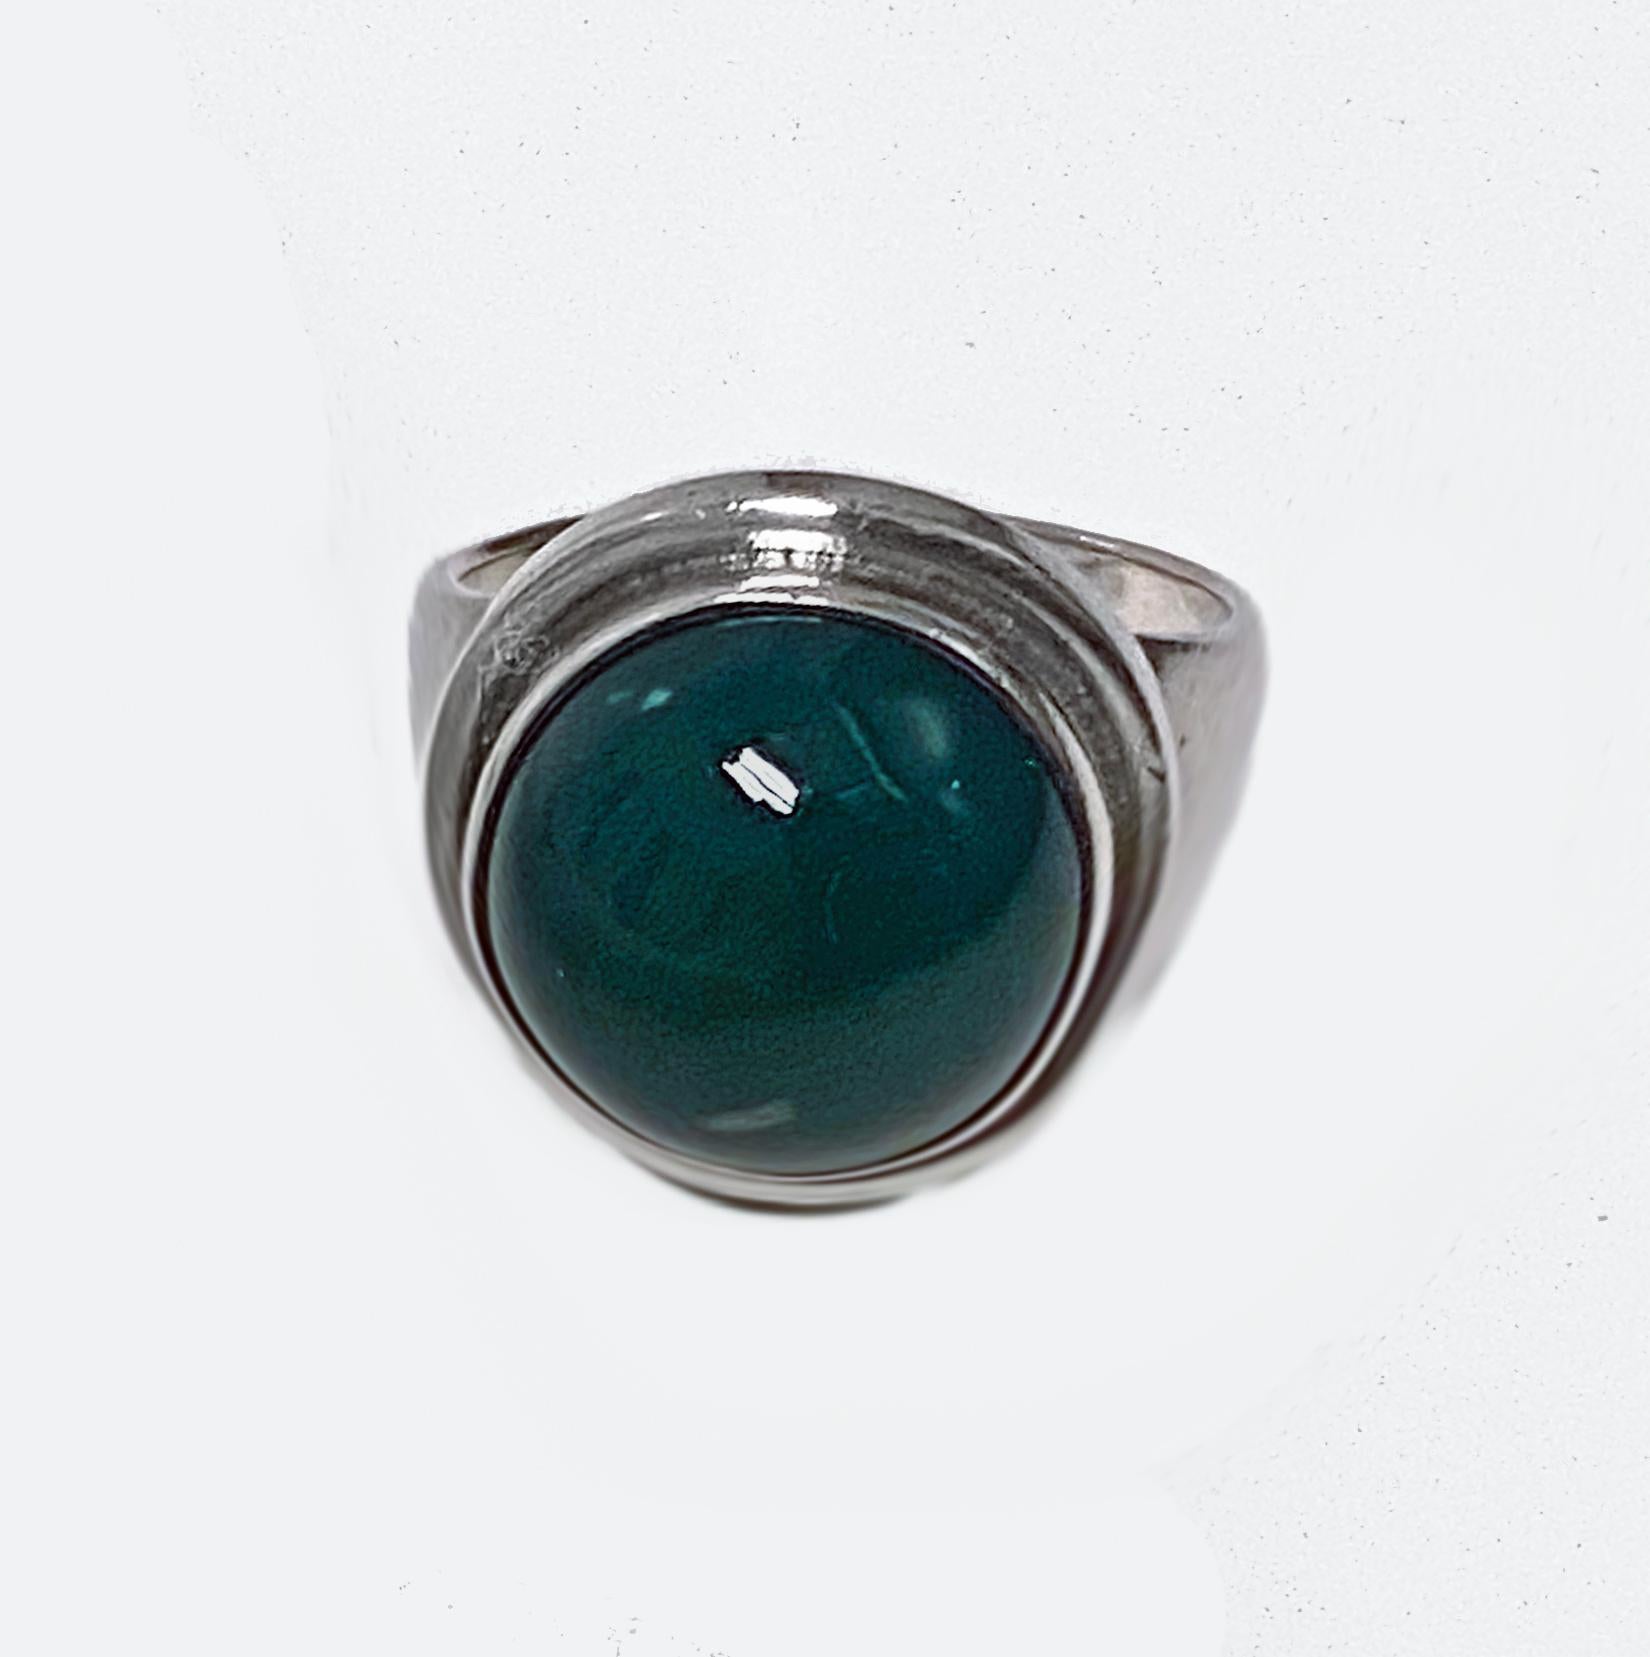 Georg Jensen very slightly oval green Chrysoprase Sterling Silver Ring C.1970. Designed by Harald Nielsen, Danish, model no. 46F. Oval cabochon chrysoprase collet set upon slightly convex outer oval frame, plain tapered shoulder. Fits very